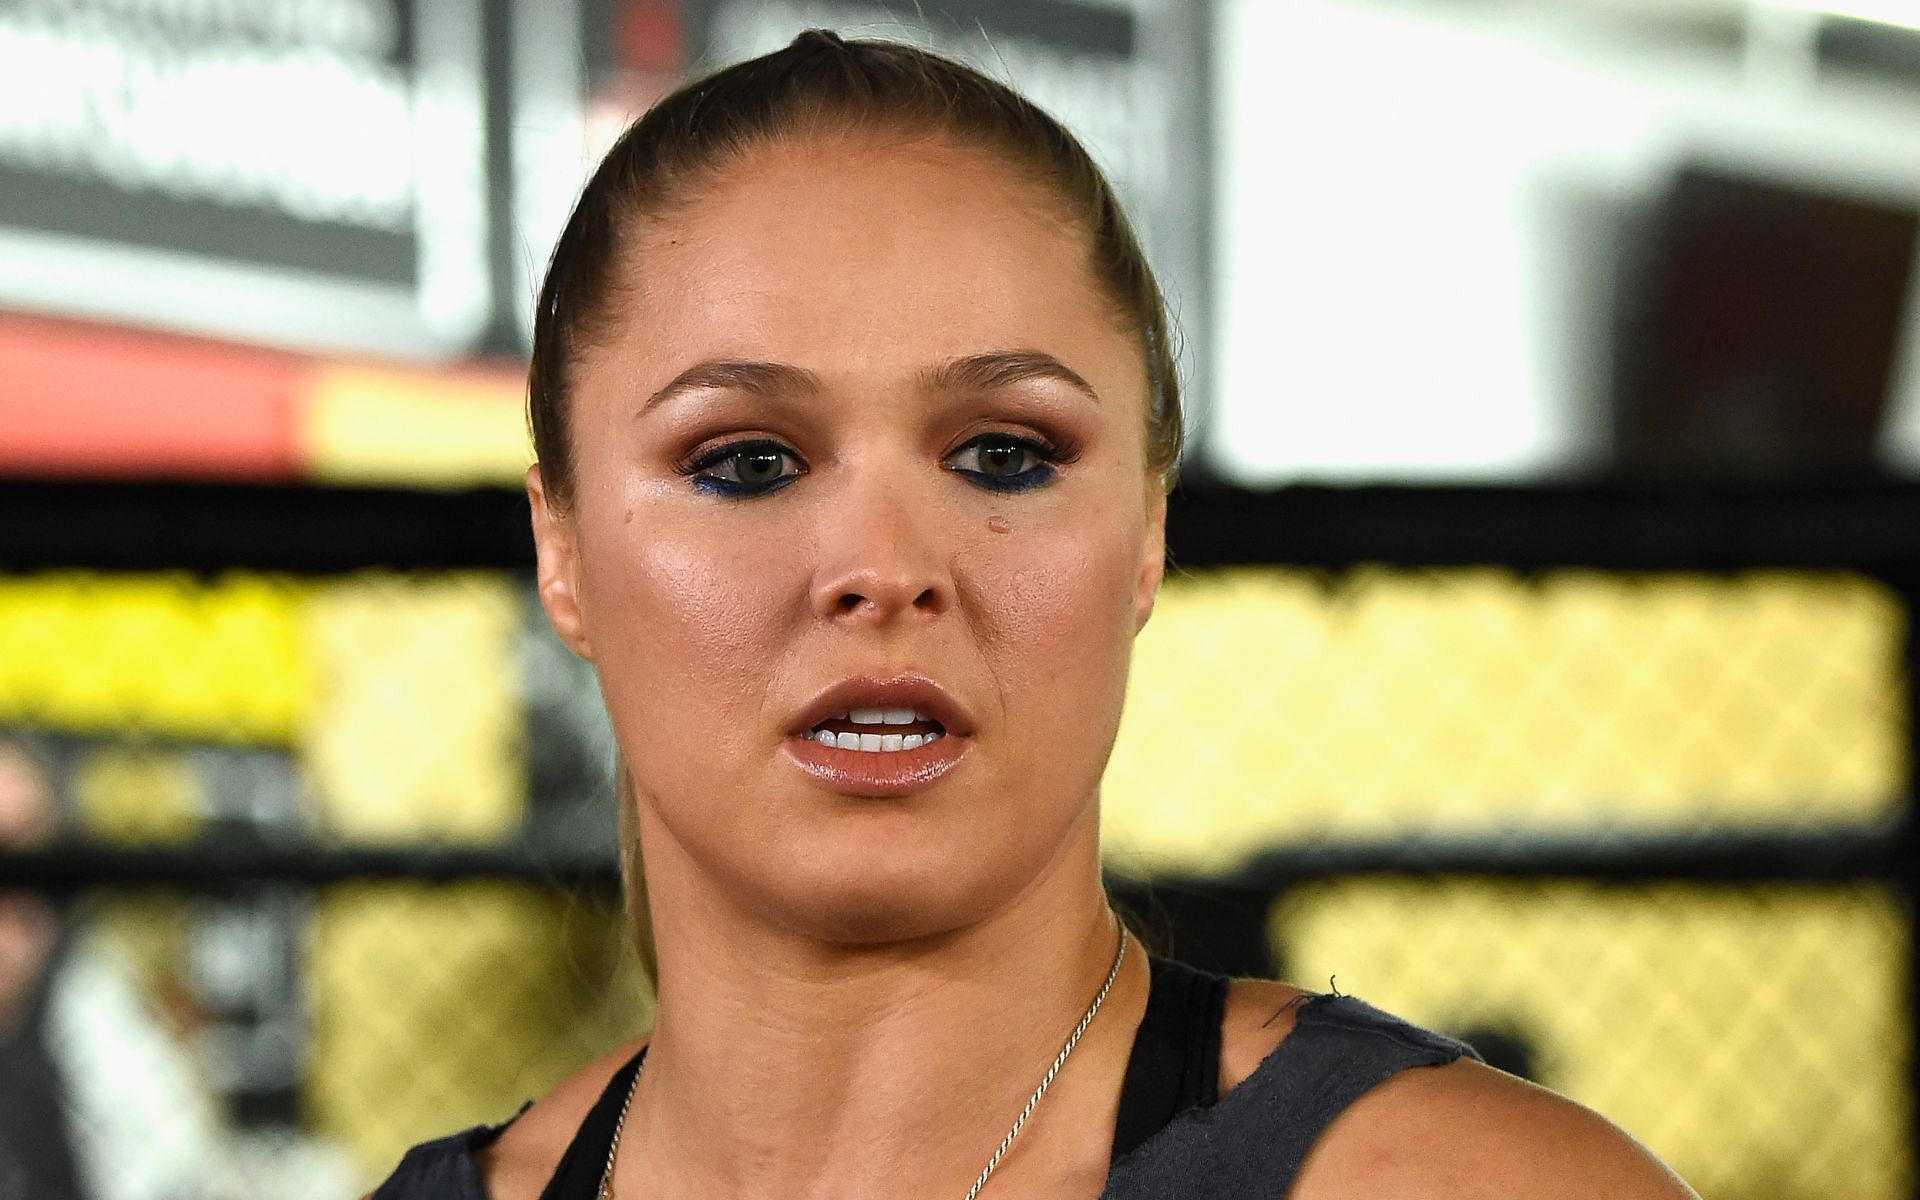 MMA icon Ronda Rousey is beheld as one of the biggest box office draws in combat sports history [Image courtesy: Getty Images]